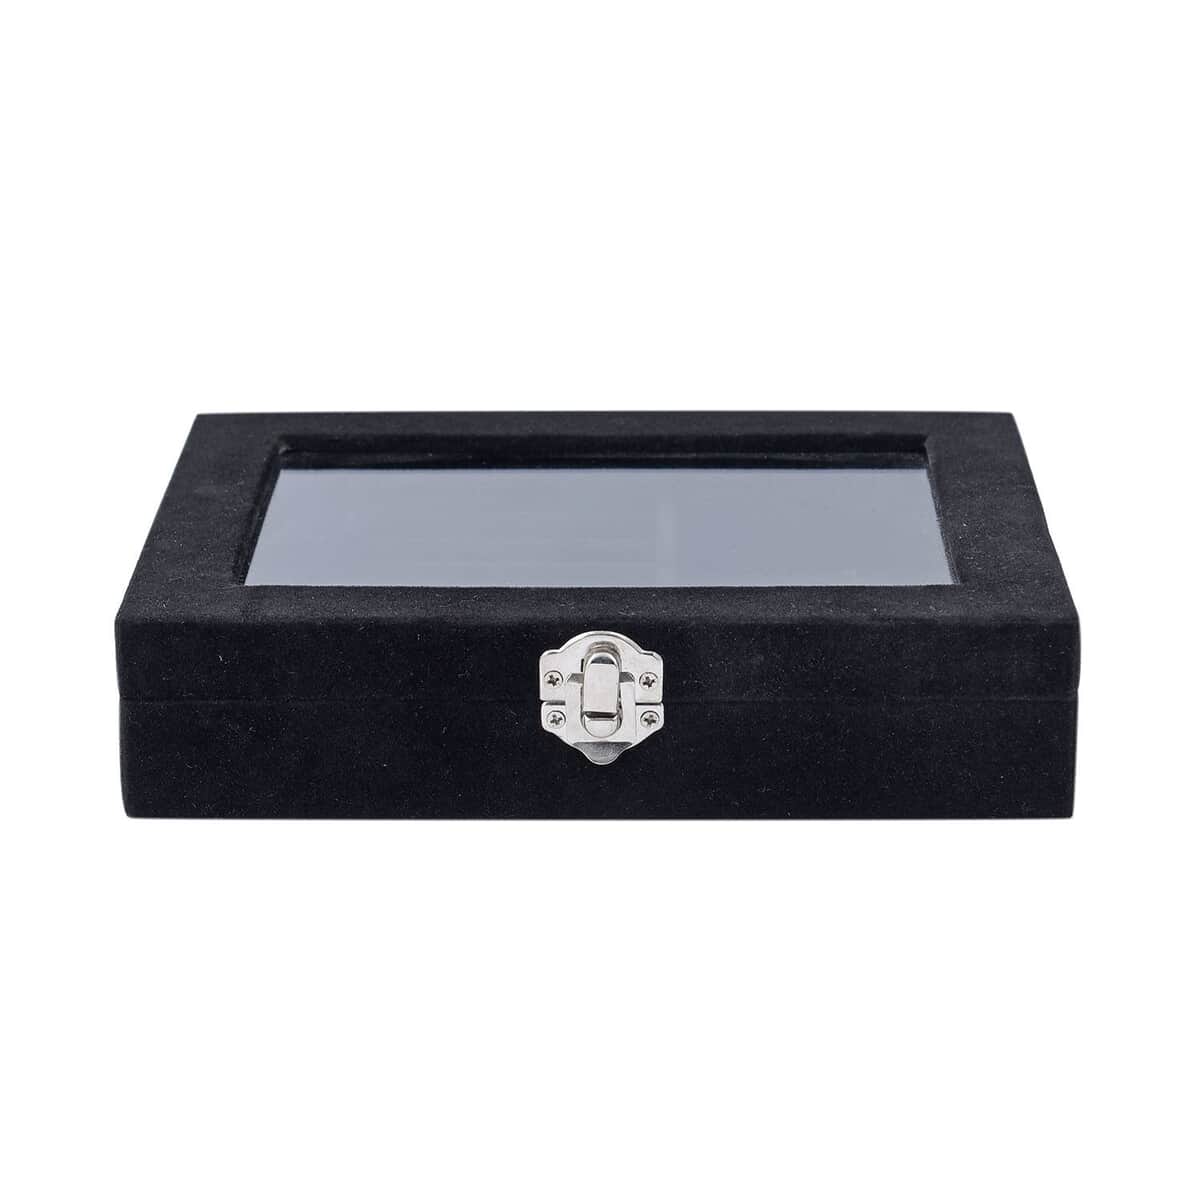 Black Velvet Jewelry Box with Anti Tarnish Lining & Lock (Rings Hold Up to 28, Brooch, Pendant, Earrings) image number 1